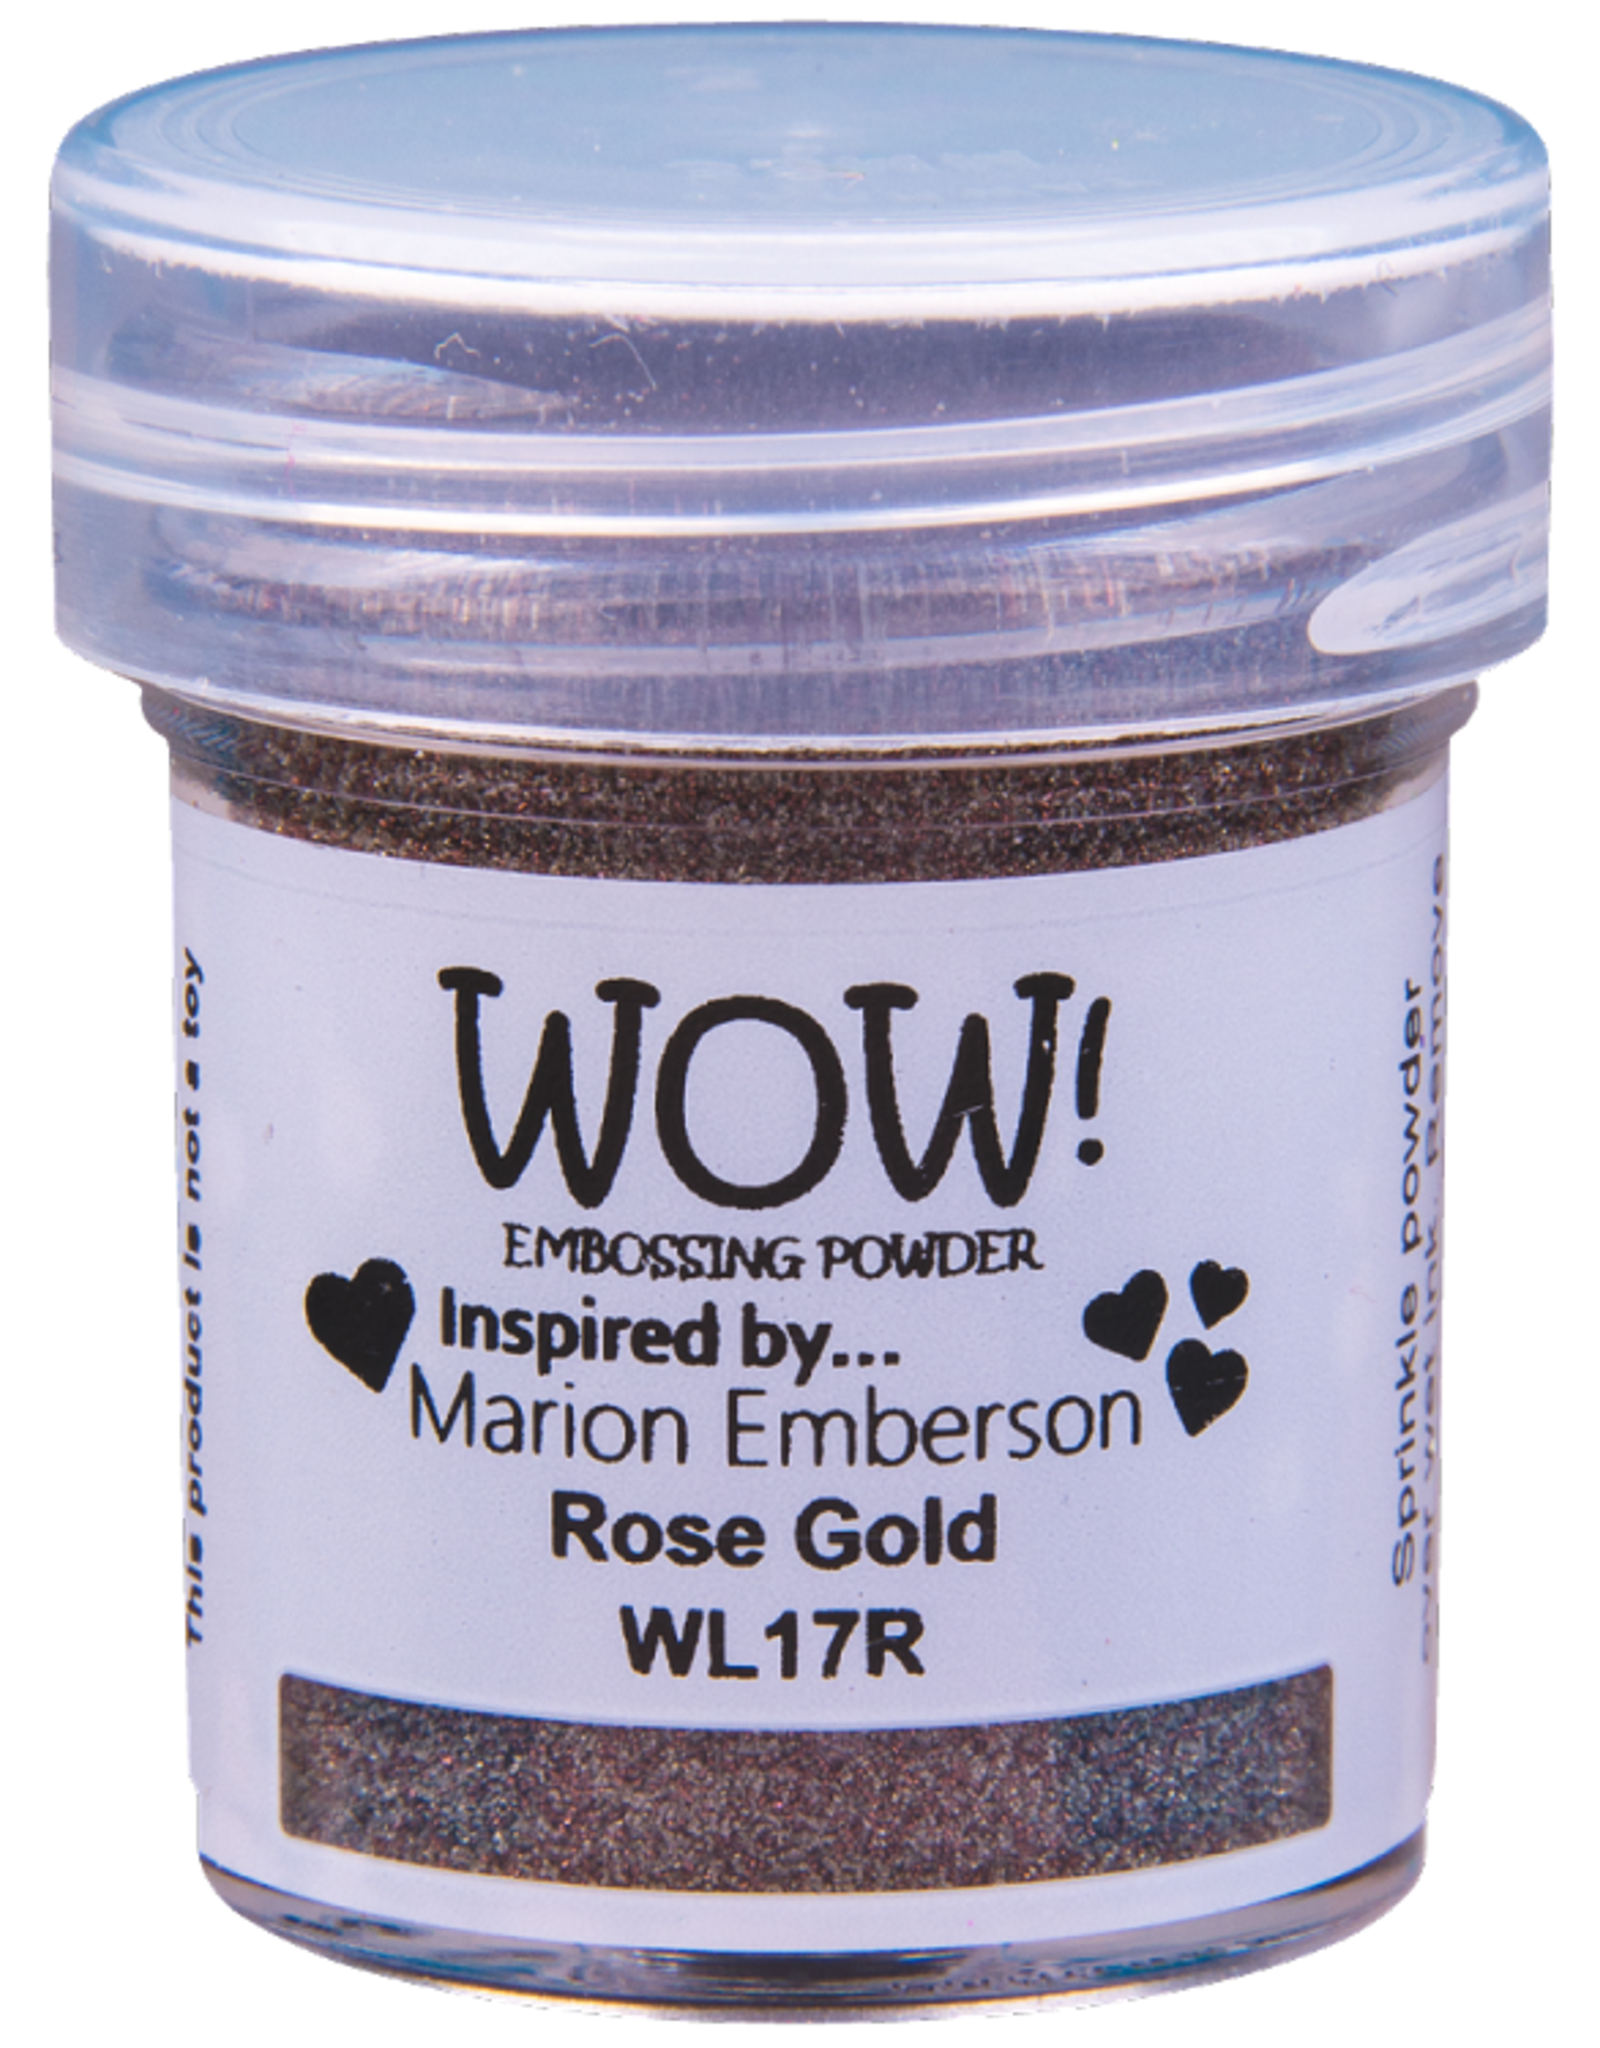 WOW! WOW! ROSE GOLD EMBOSSING POWDER 0.5OZ